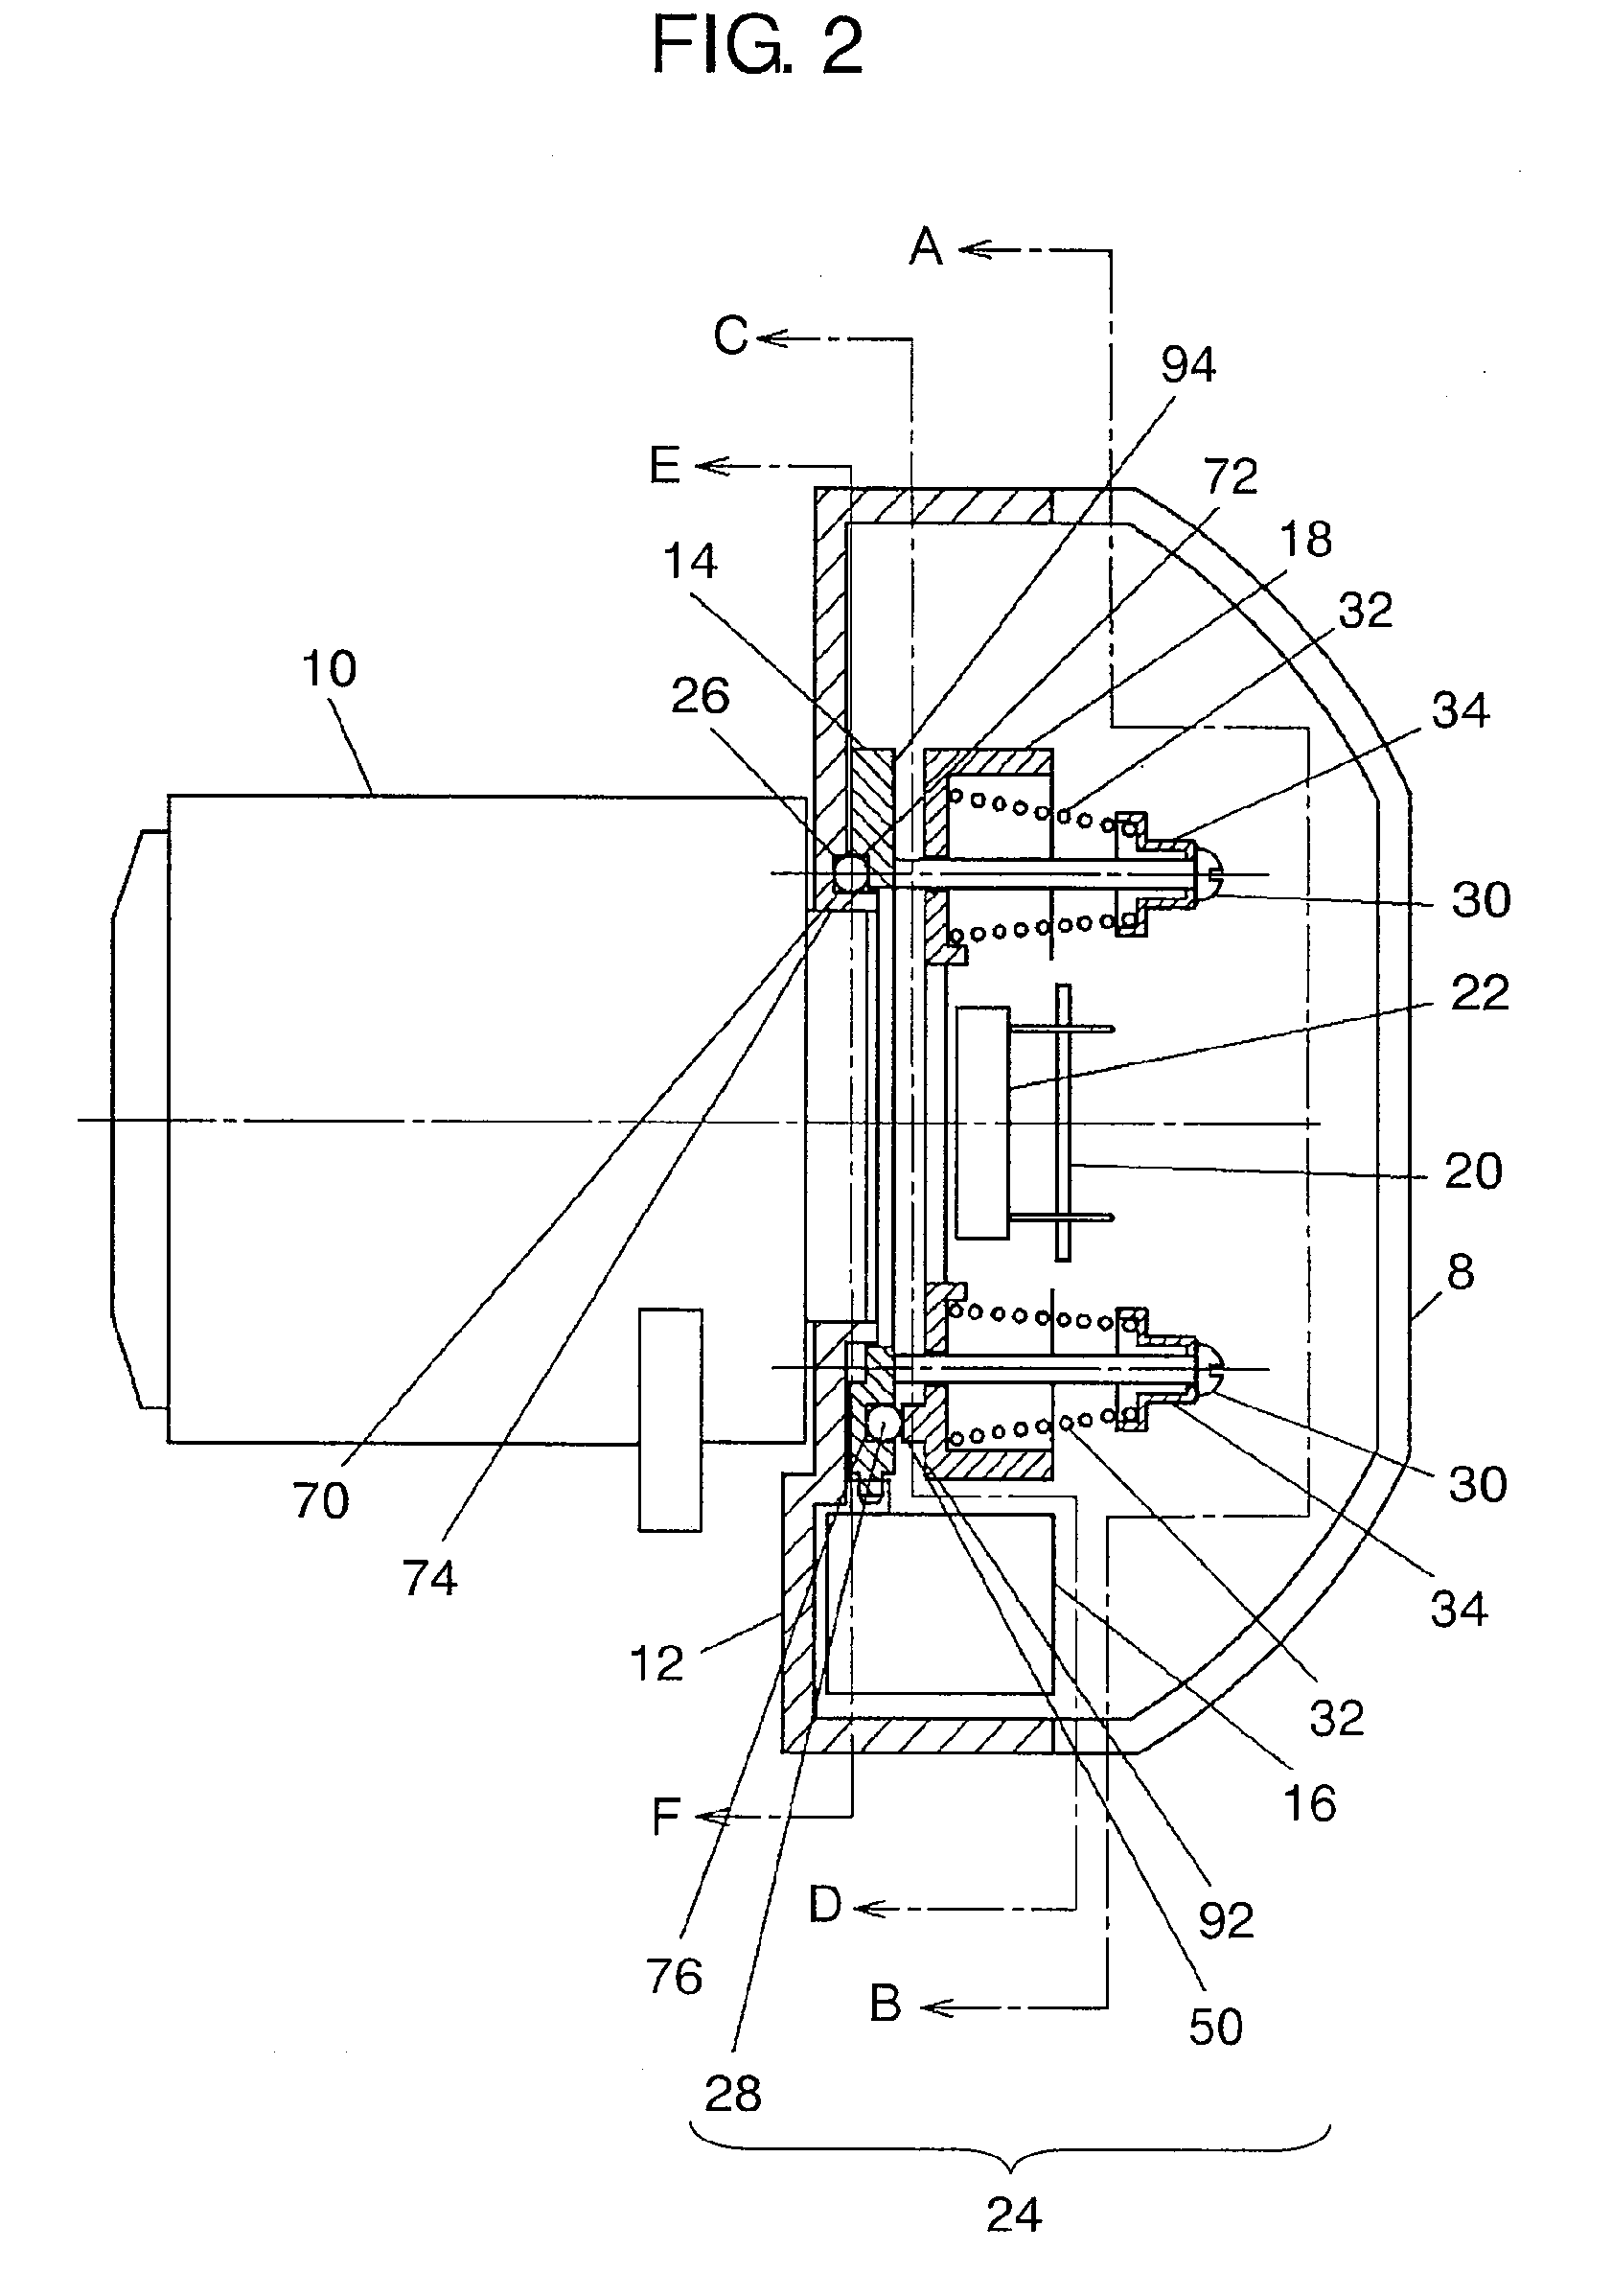 Imaging device driver and photography instrument employing it